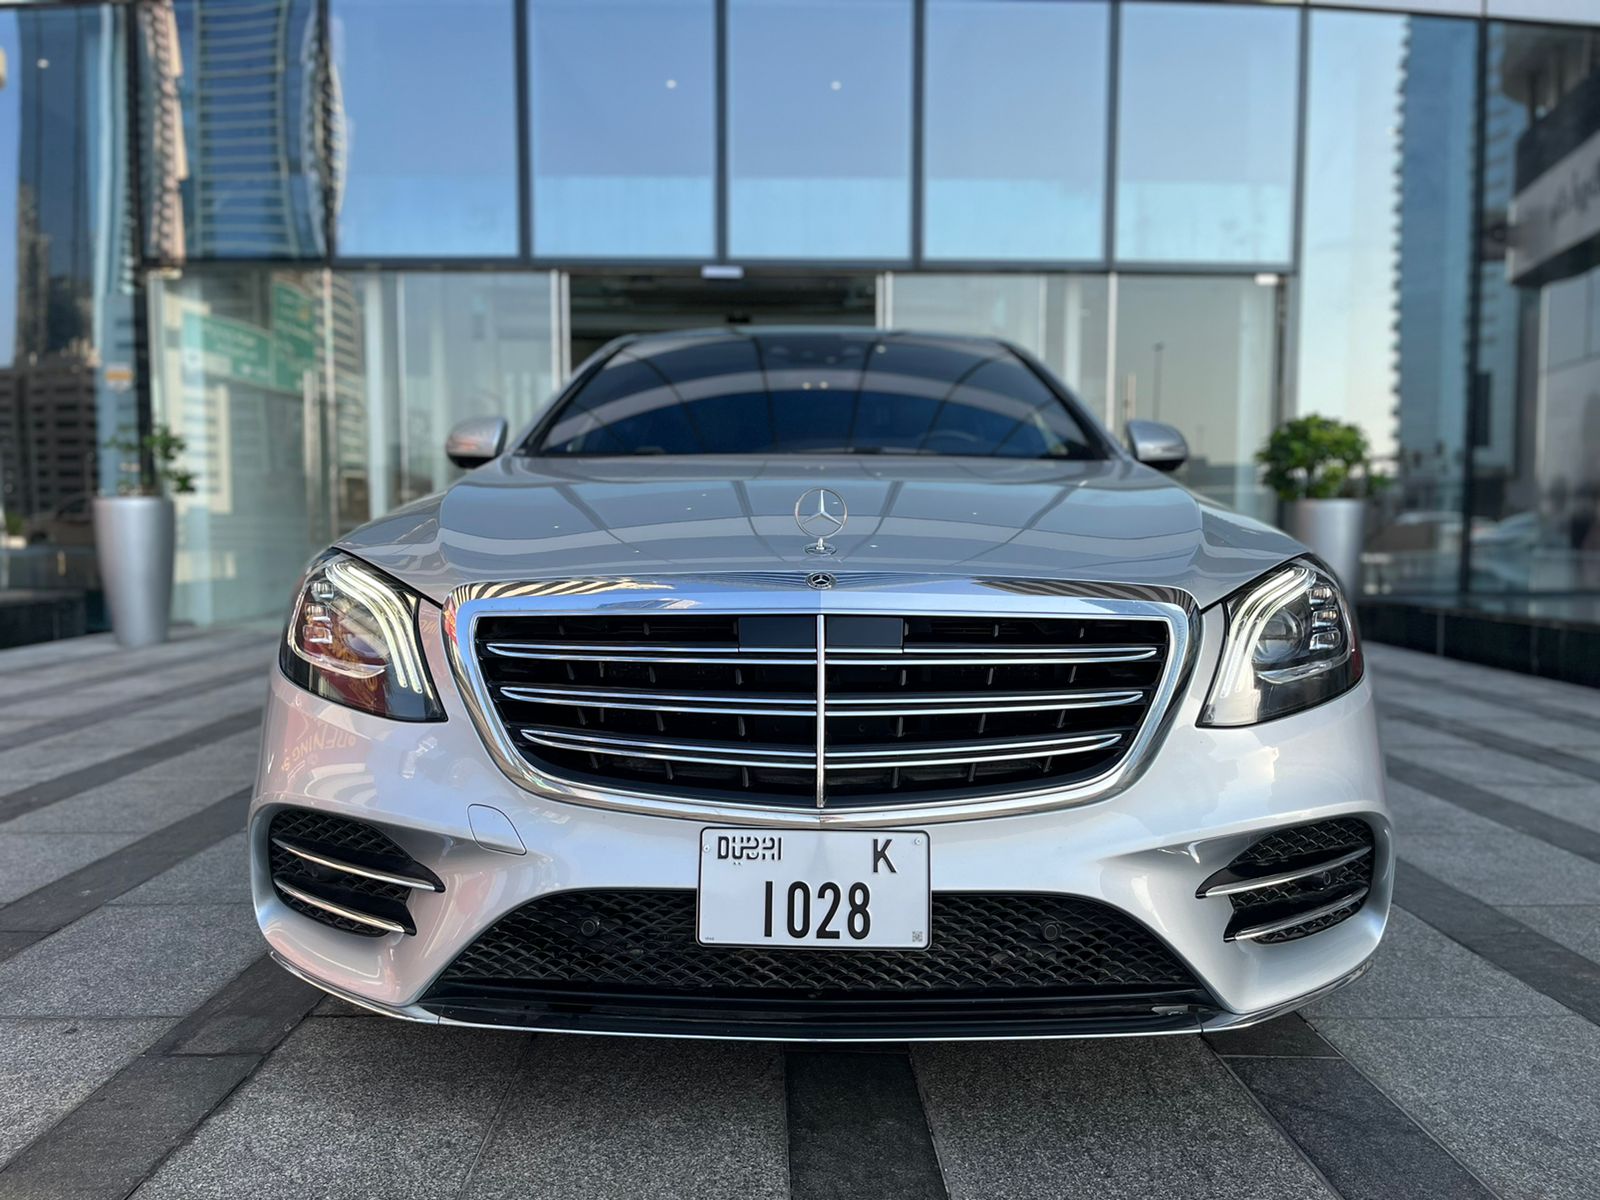 MERCEDES S-CLASS 2018 Listed By Class Cars Rental